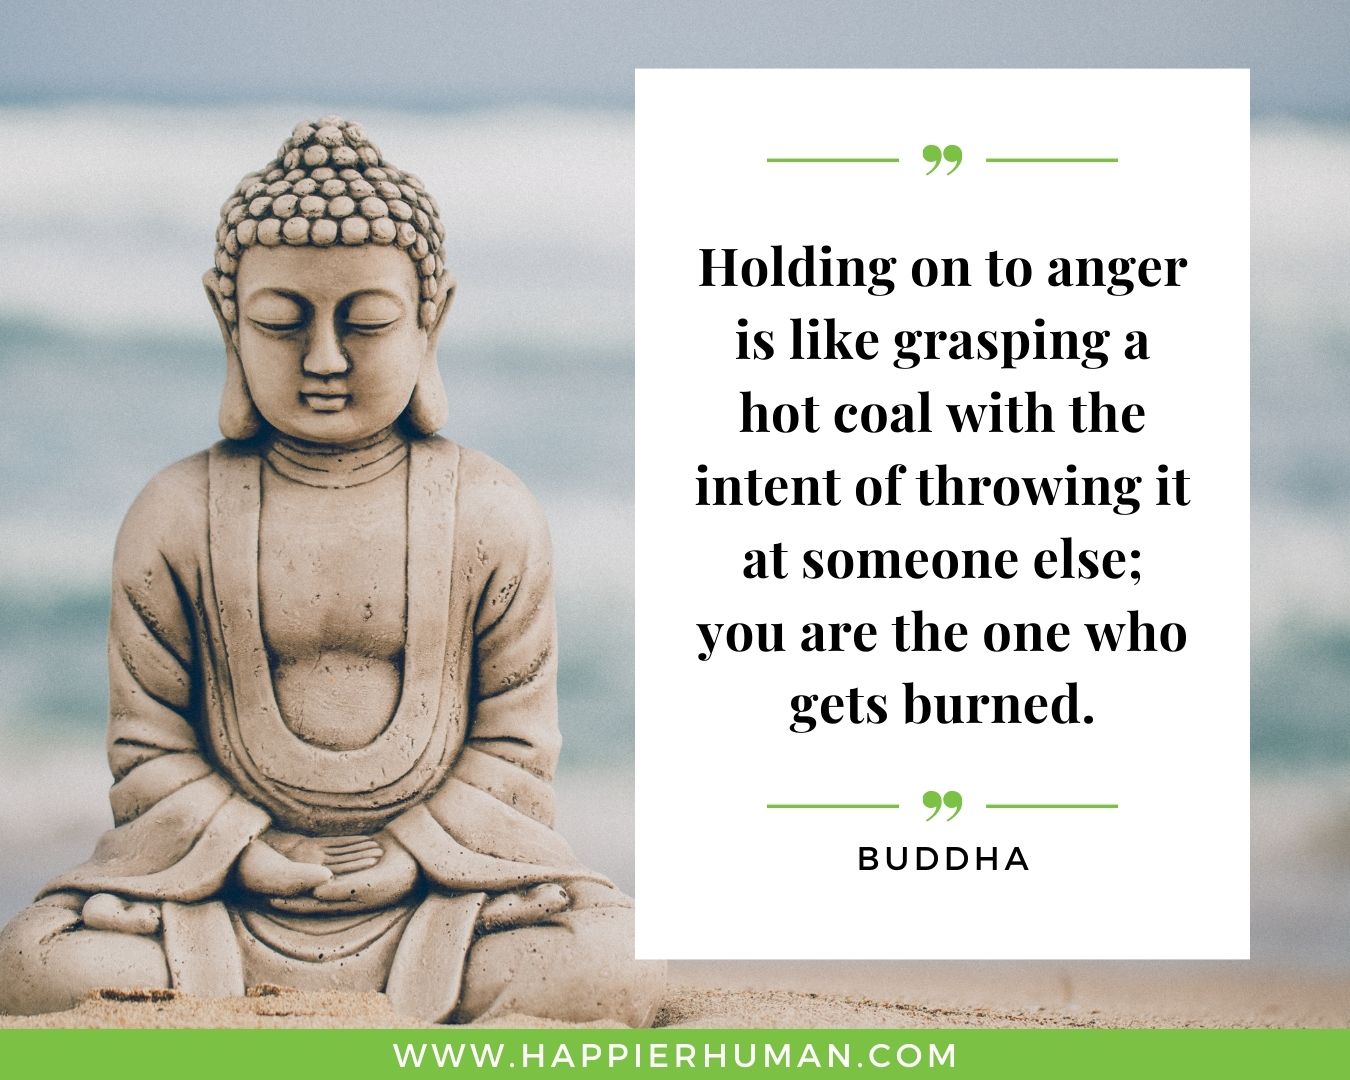 Haters Quotes - “Holding on to anger is like grasping a hot coal with the intent of throwing it at someone else; you are the one who gets burned.” - Buddha